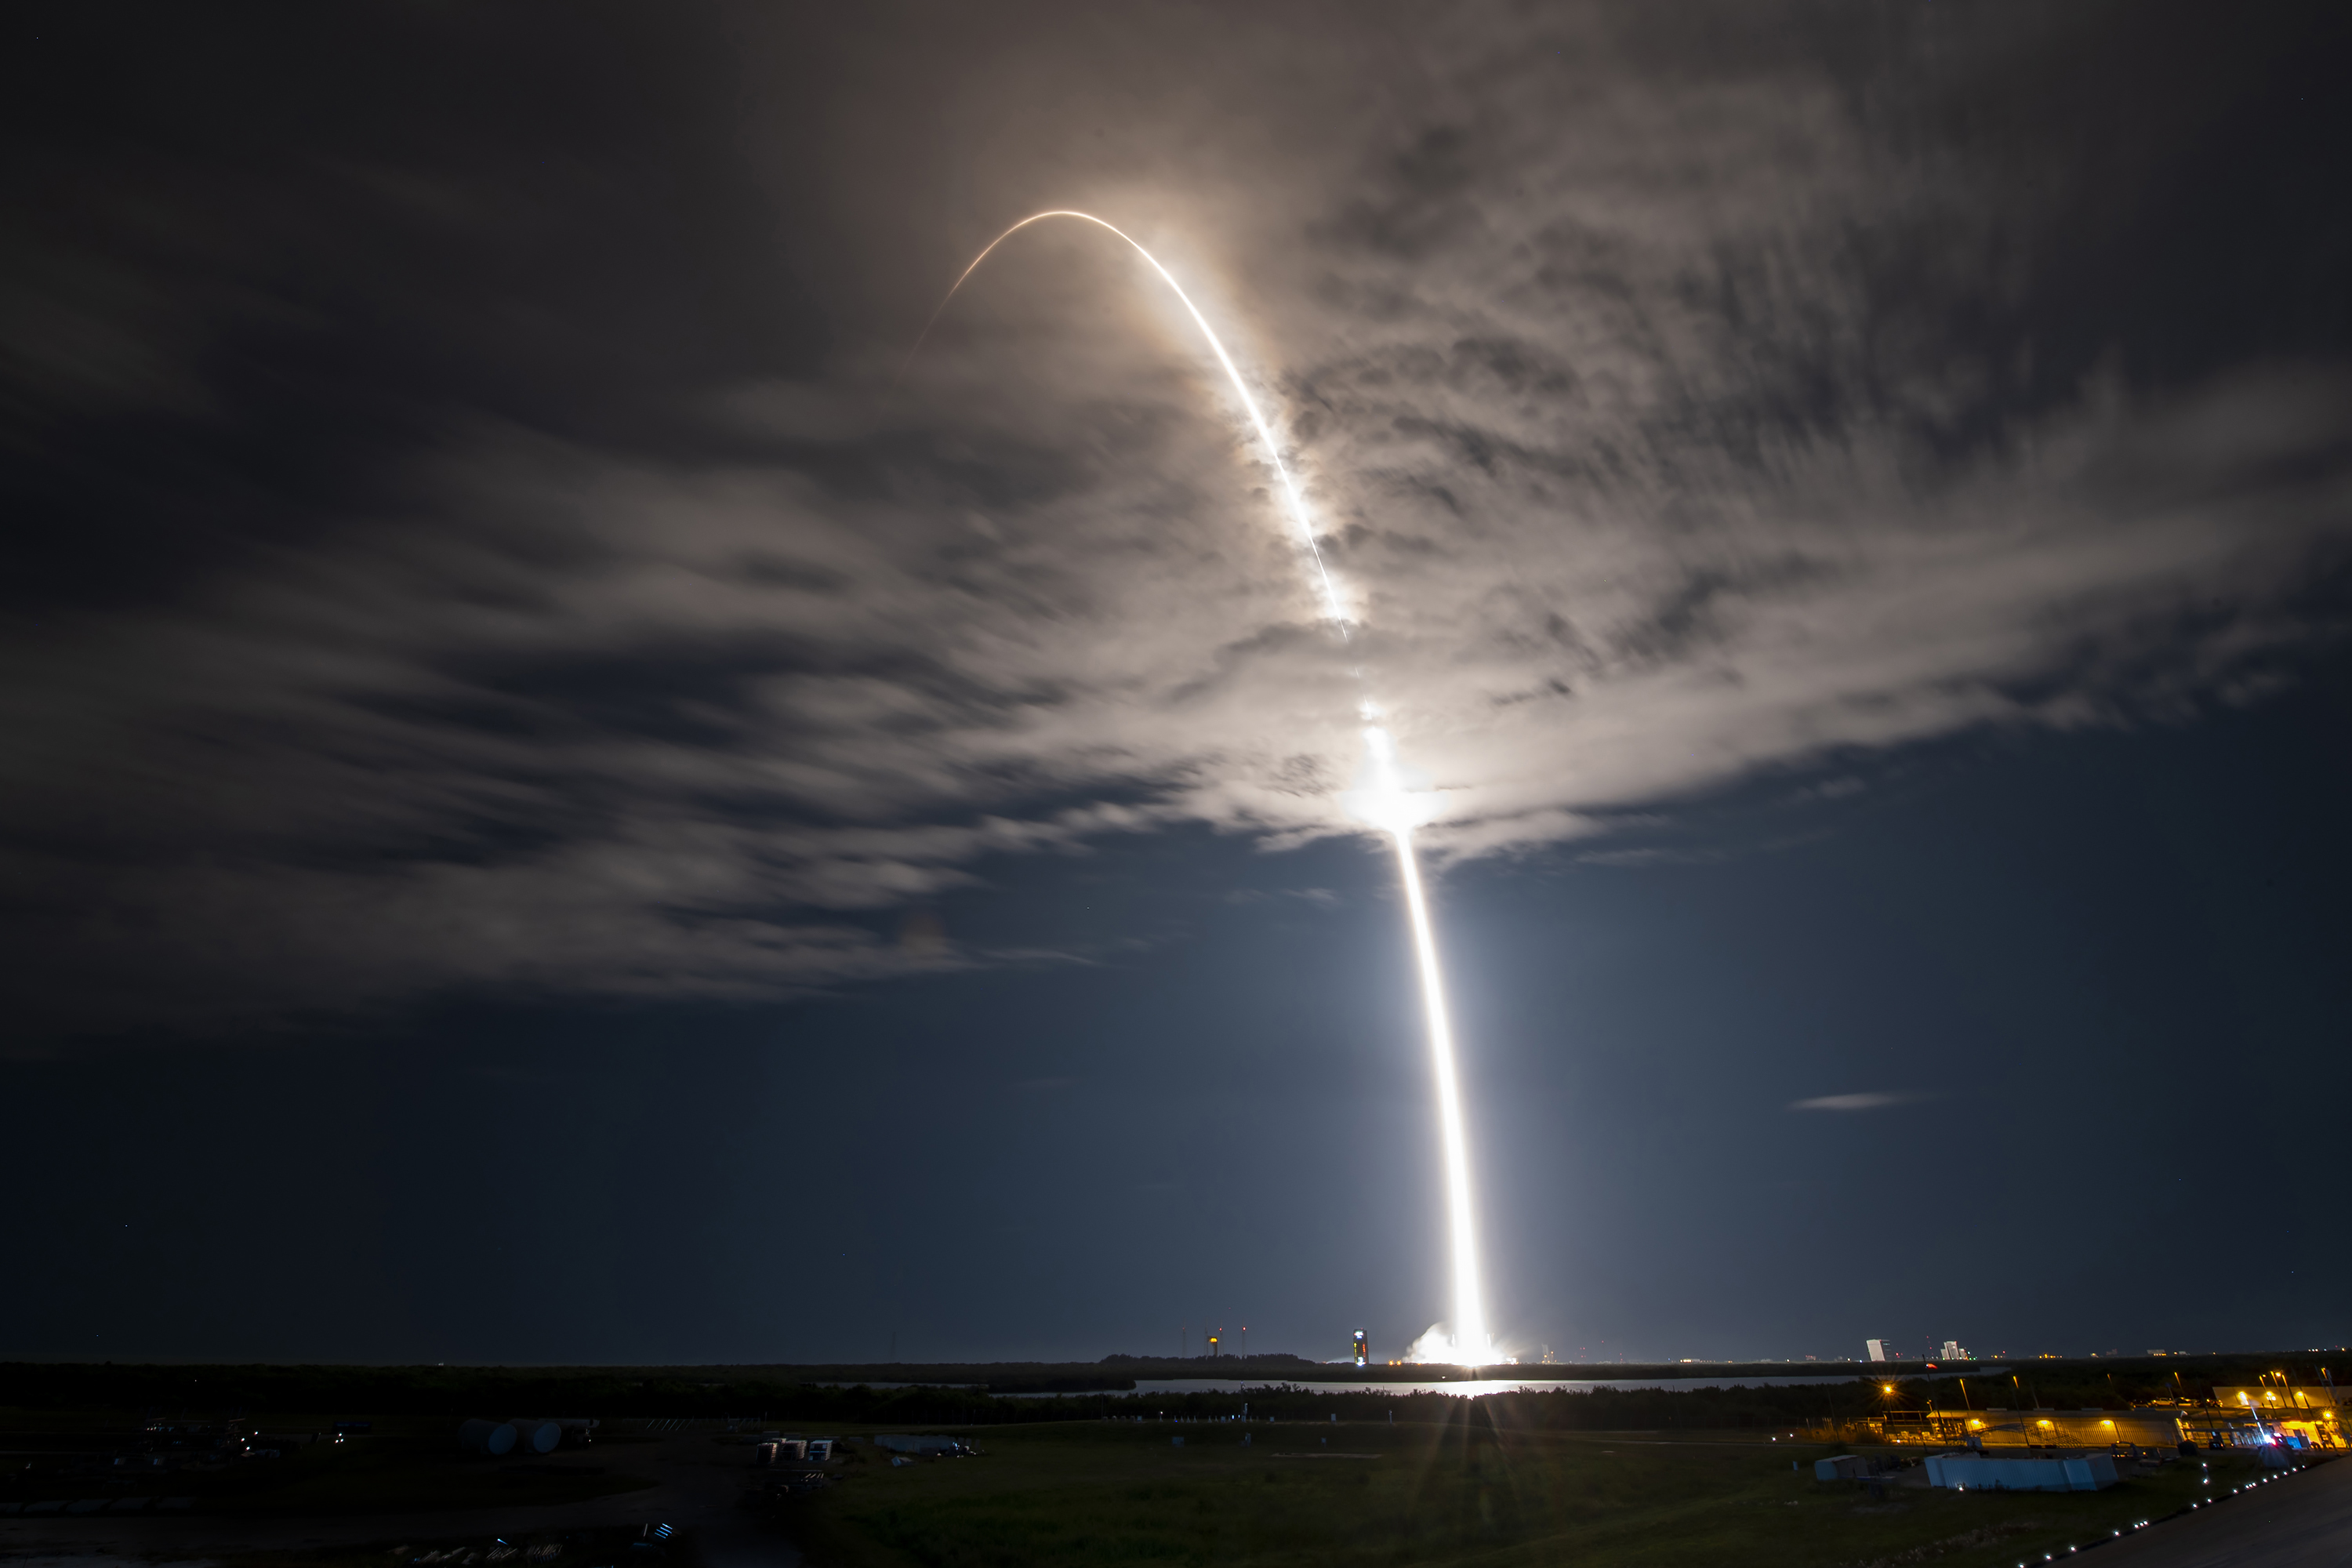 SpaceX delivers 52 more Starlink satellites into orbit